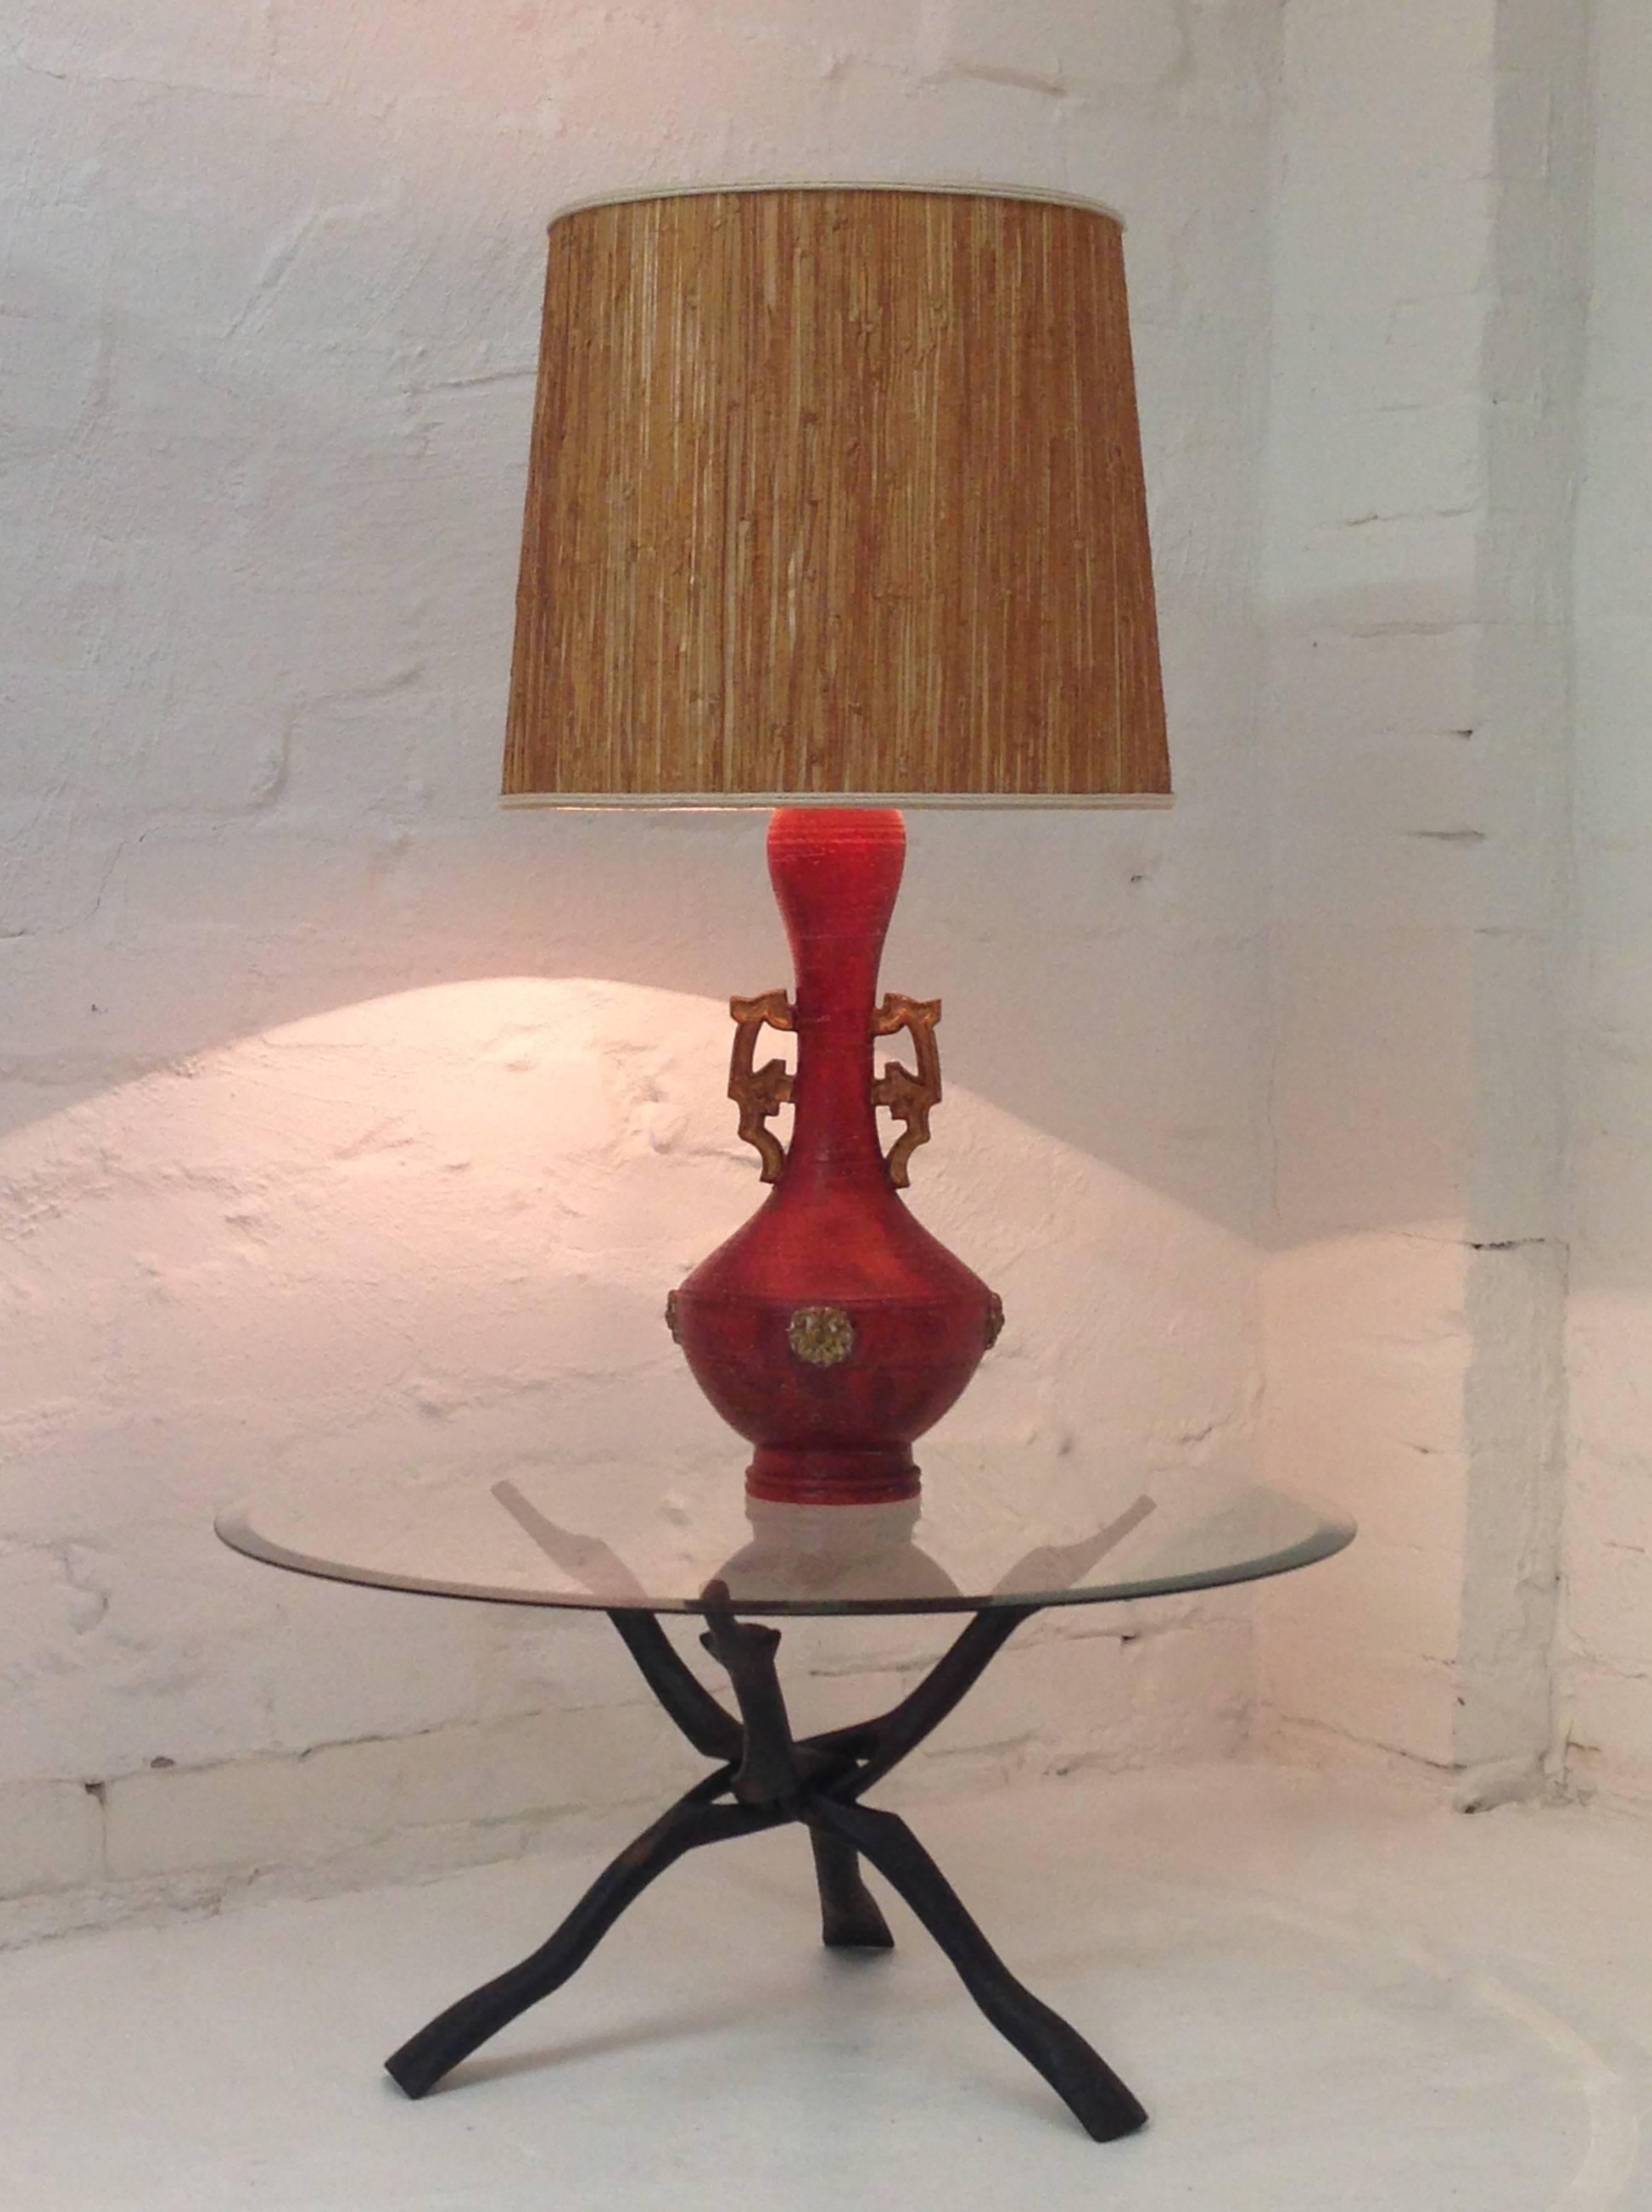 This absolutely stunning lamp is an item of high quality and exaggerated style. The attention to detail in the construction of the lampshade alone is wonderful to see. If you want to set a mood of nostalgic decadence and richness, look no further,